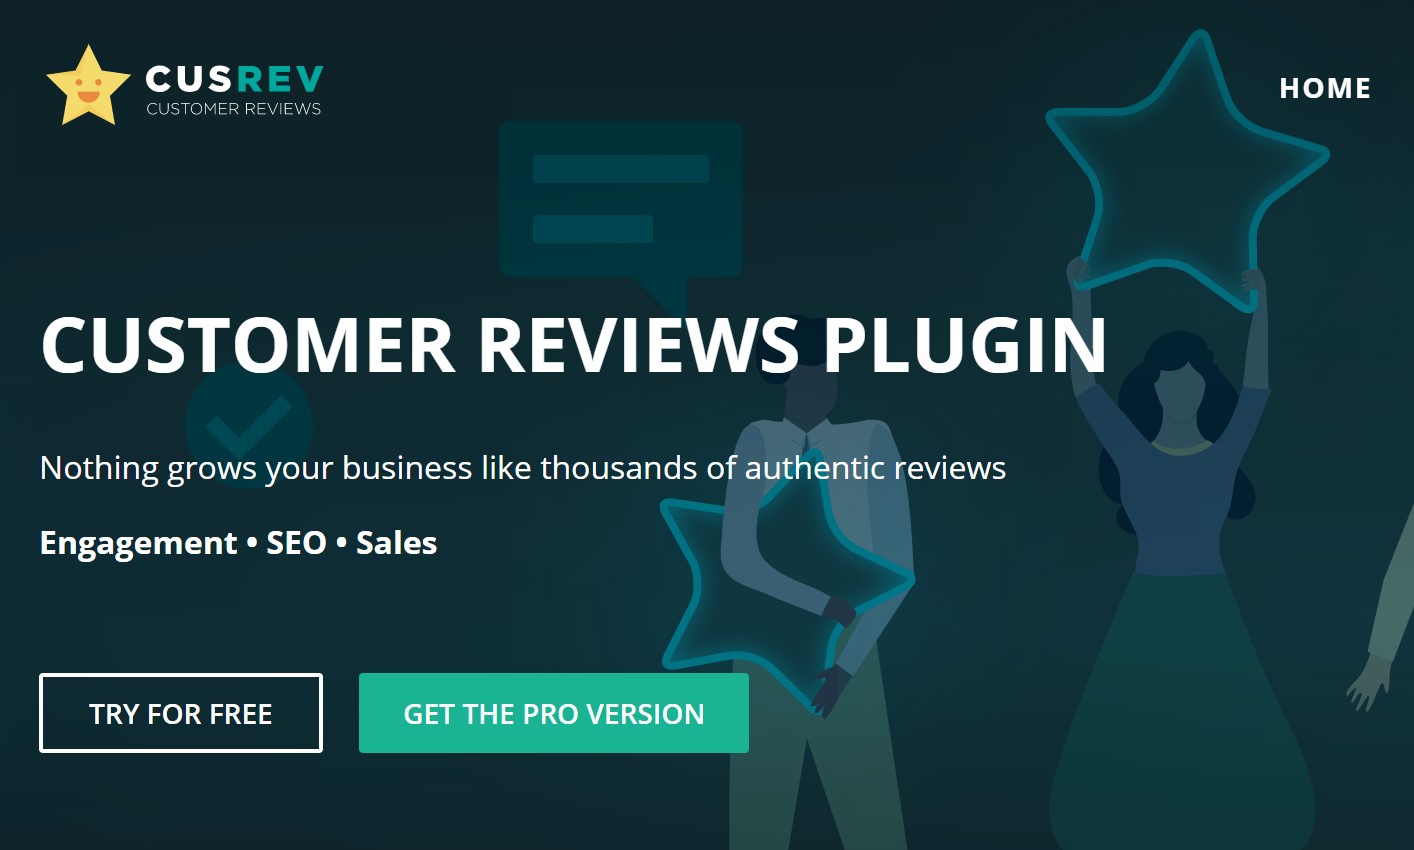 Customer Reviews for WooCommerce Pro 5.3.6 by cusrev